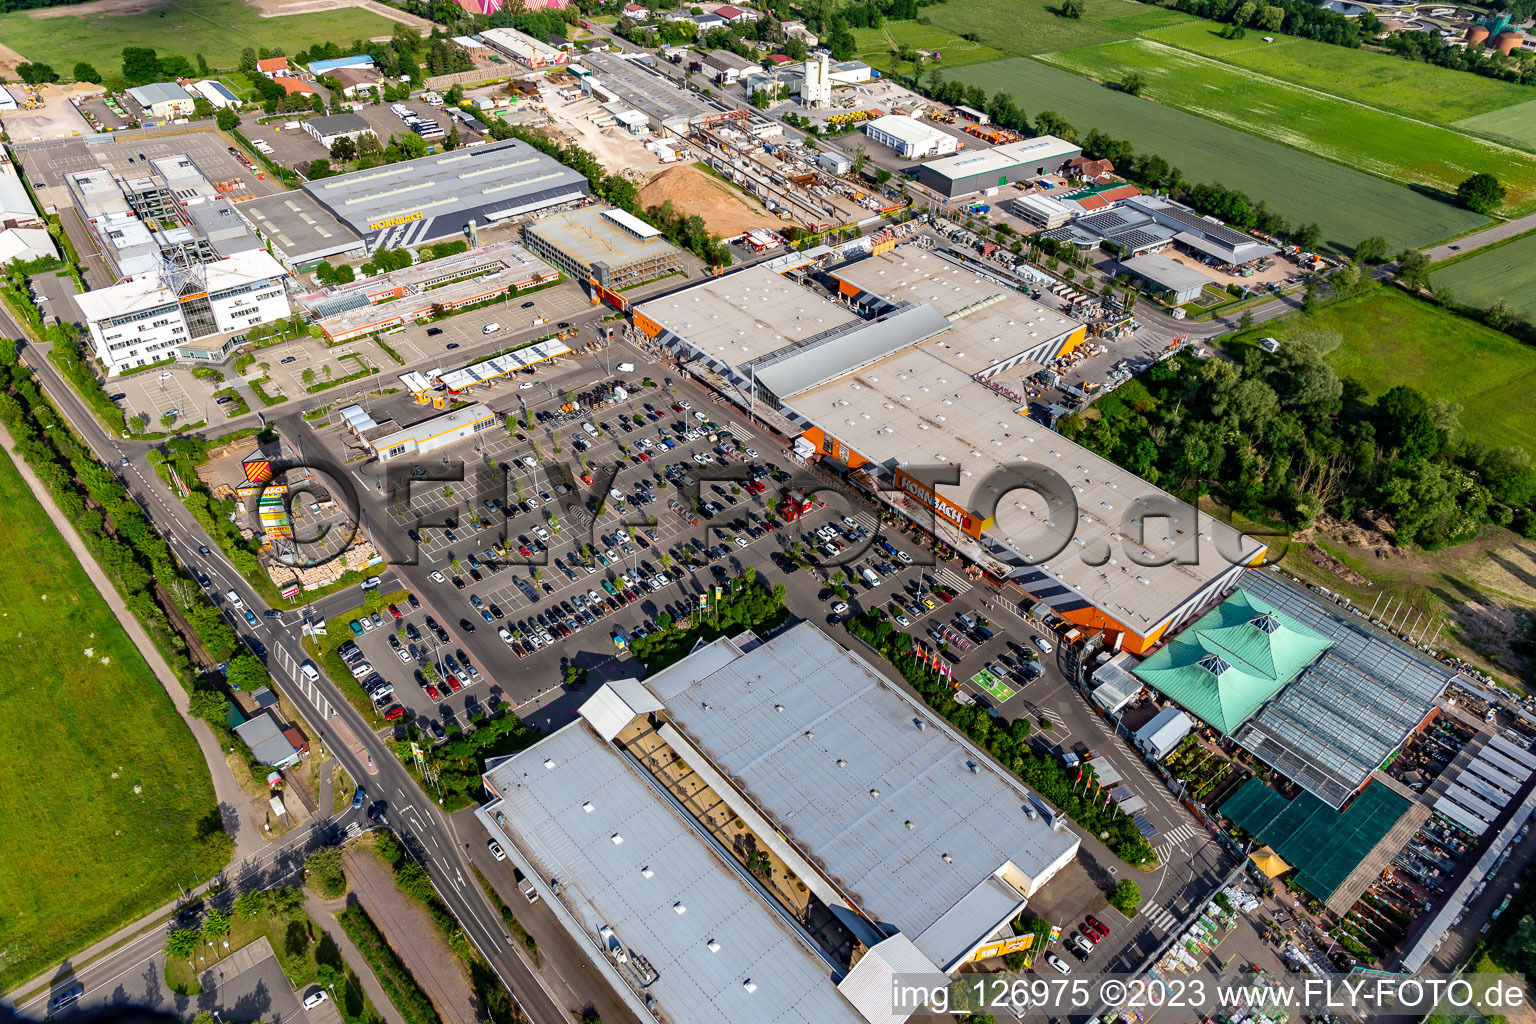 Aerial photograpy of Hornbach hardware and garden store in Bornheim in the state Rhineland-Palatinate, Germany